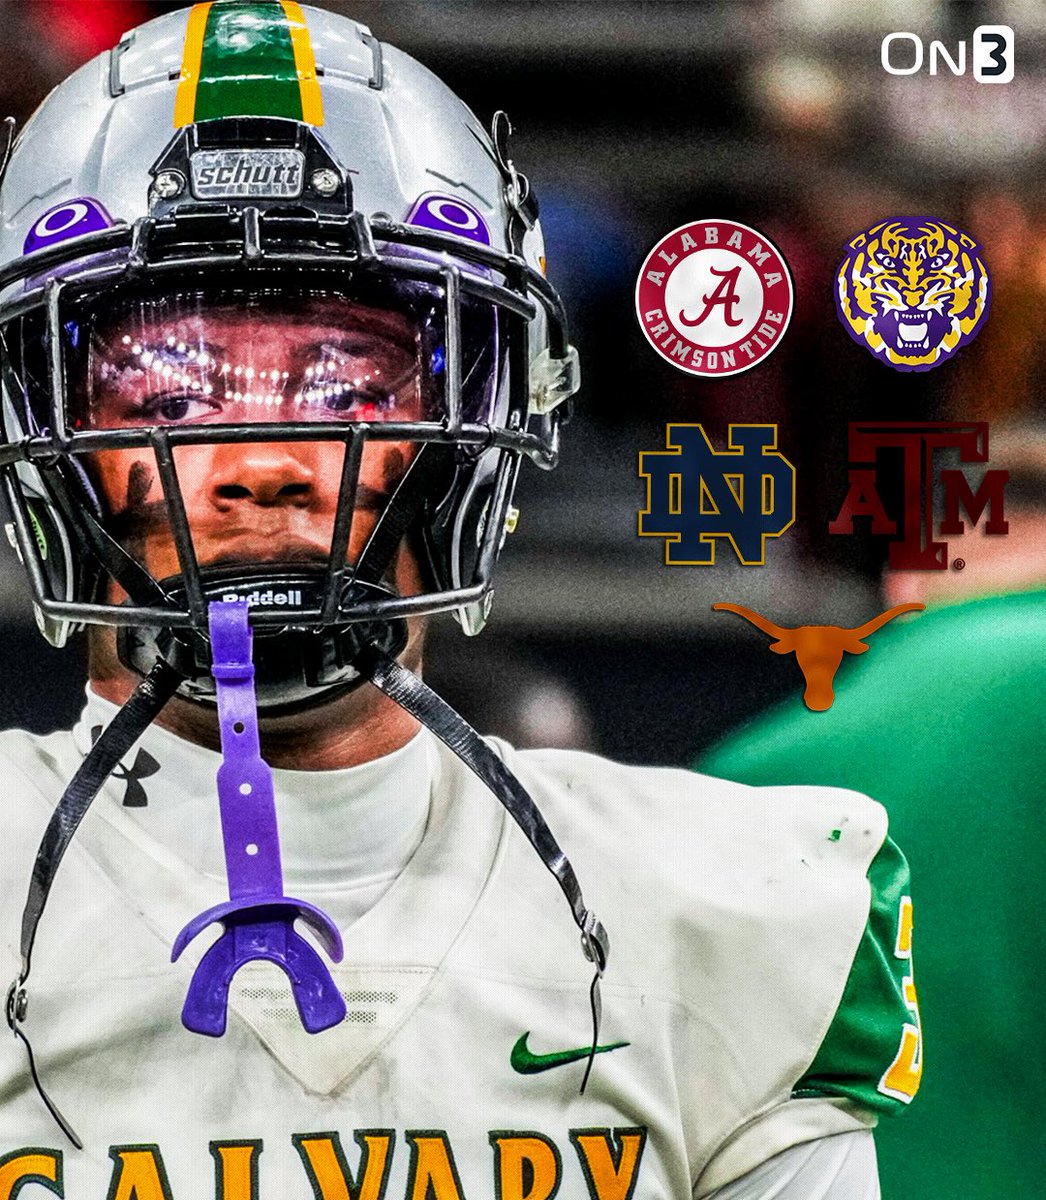 4-star RB James Simon is closing in on a decision, per @ChadSimmons_ He'll choose between Alabama, LSU, Notre Dame, Texas and Texas A&M‼️ Read: on3.com/news/4-star-rb…